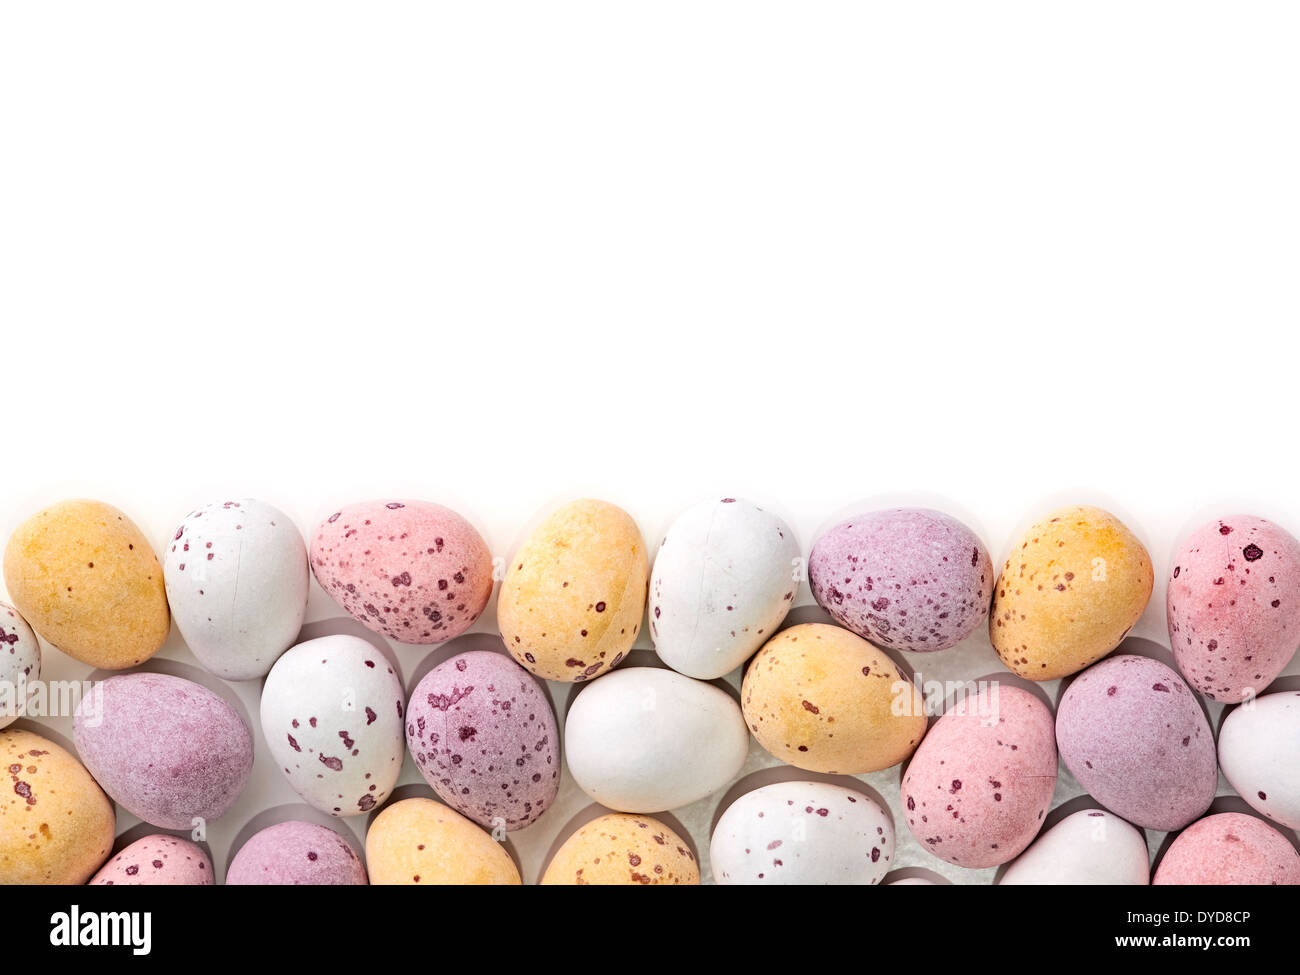 A selection of chocolate Easter Eggs with a candy crunchy shell on a white background. Stock Photo